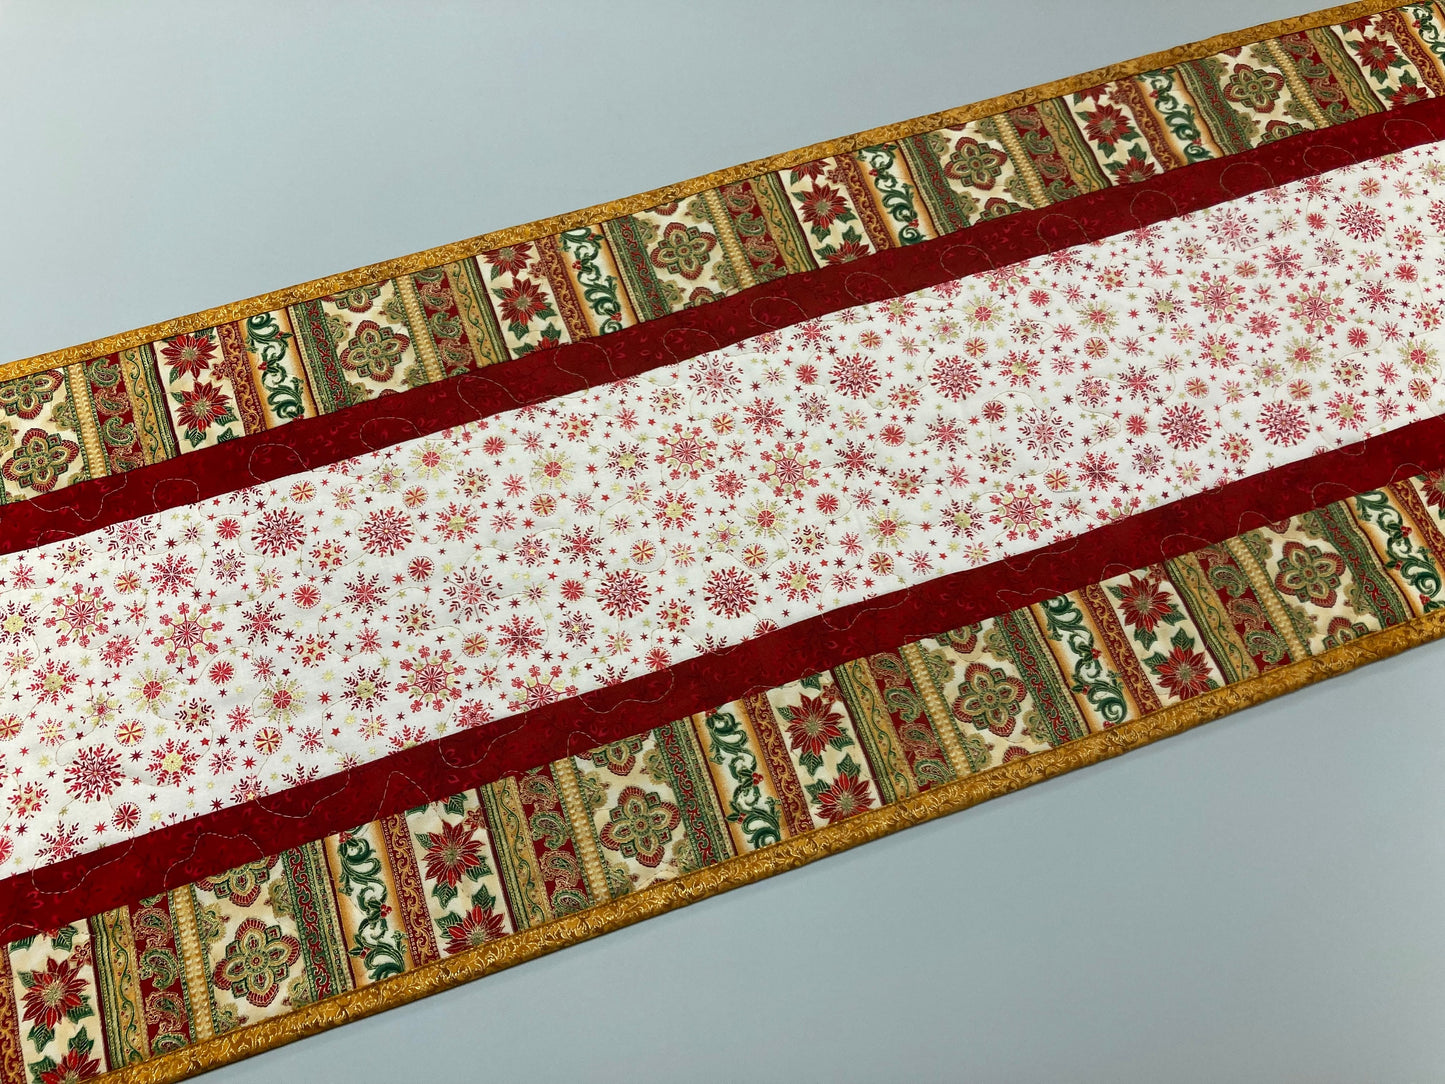 Quilted Christmas Table Runner, Red Green Gold Stripes Poinsettia Snowflakes Winter Holiday, 13x48", Reversible, Dining Coffee End Table